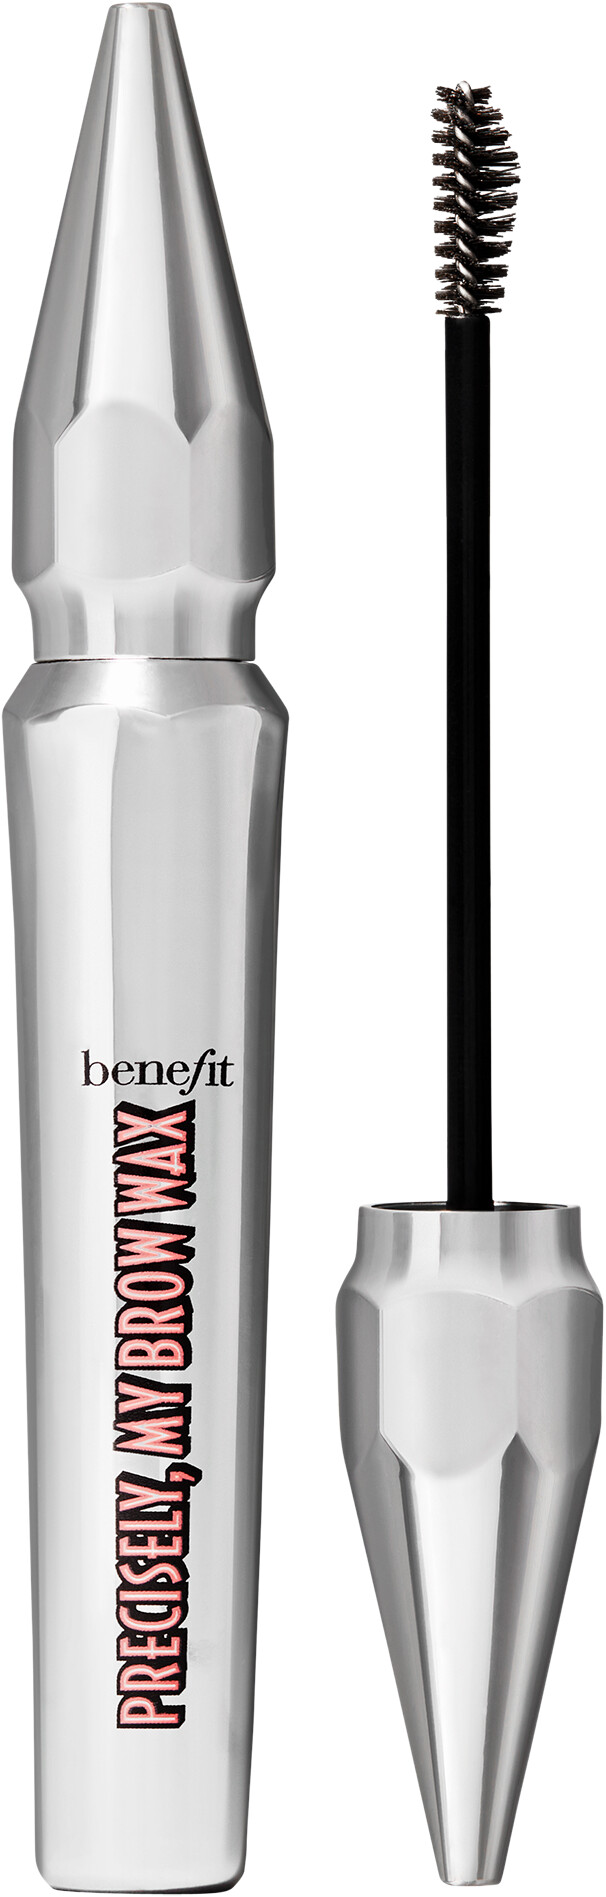 Benefit Precisely, My Brow Wax Full-Pigment Sculpting Brow Wax 5g 3.5 - Neutral Medium Brown